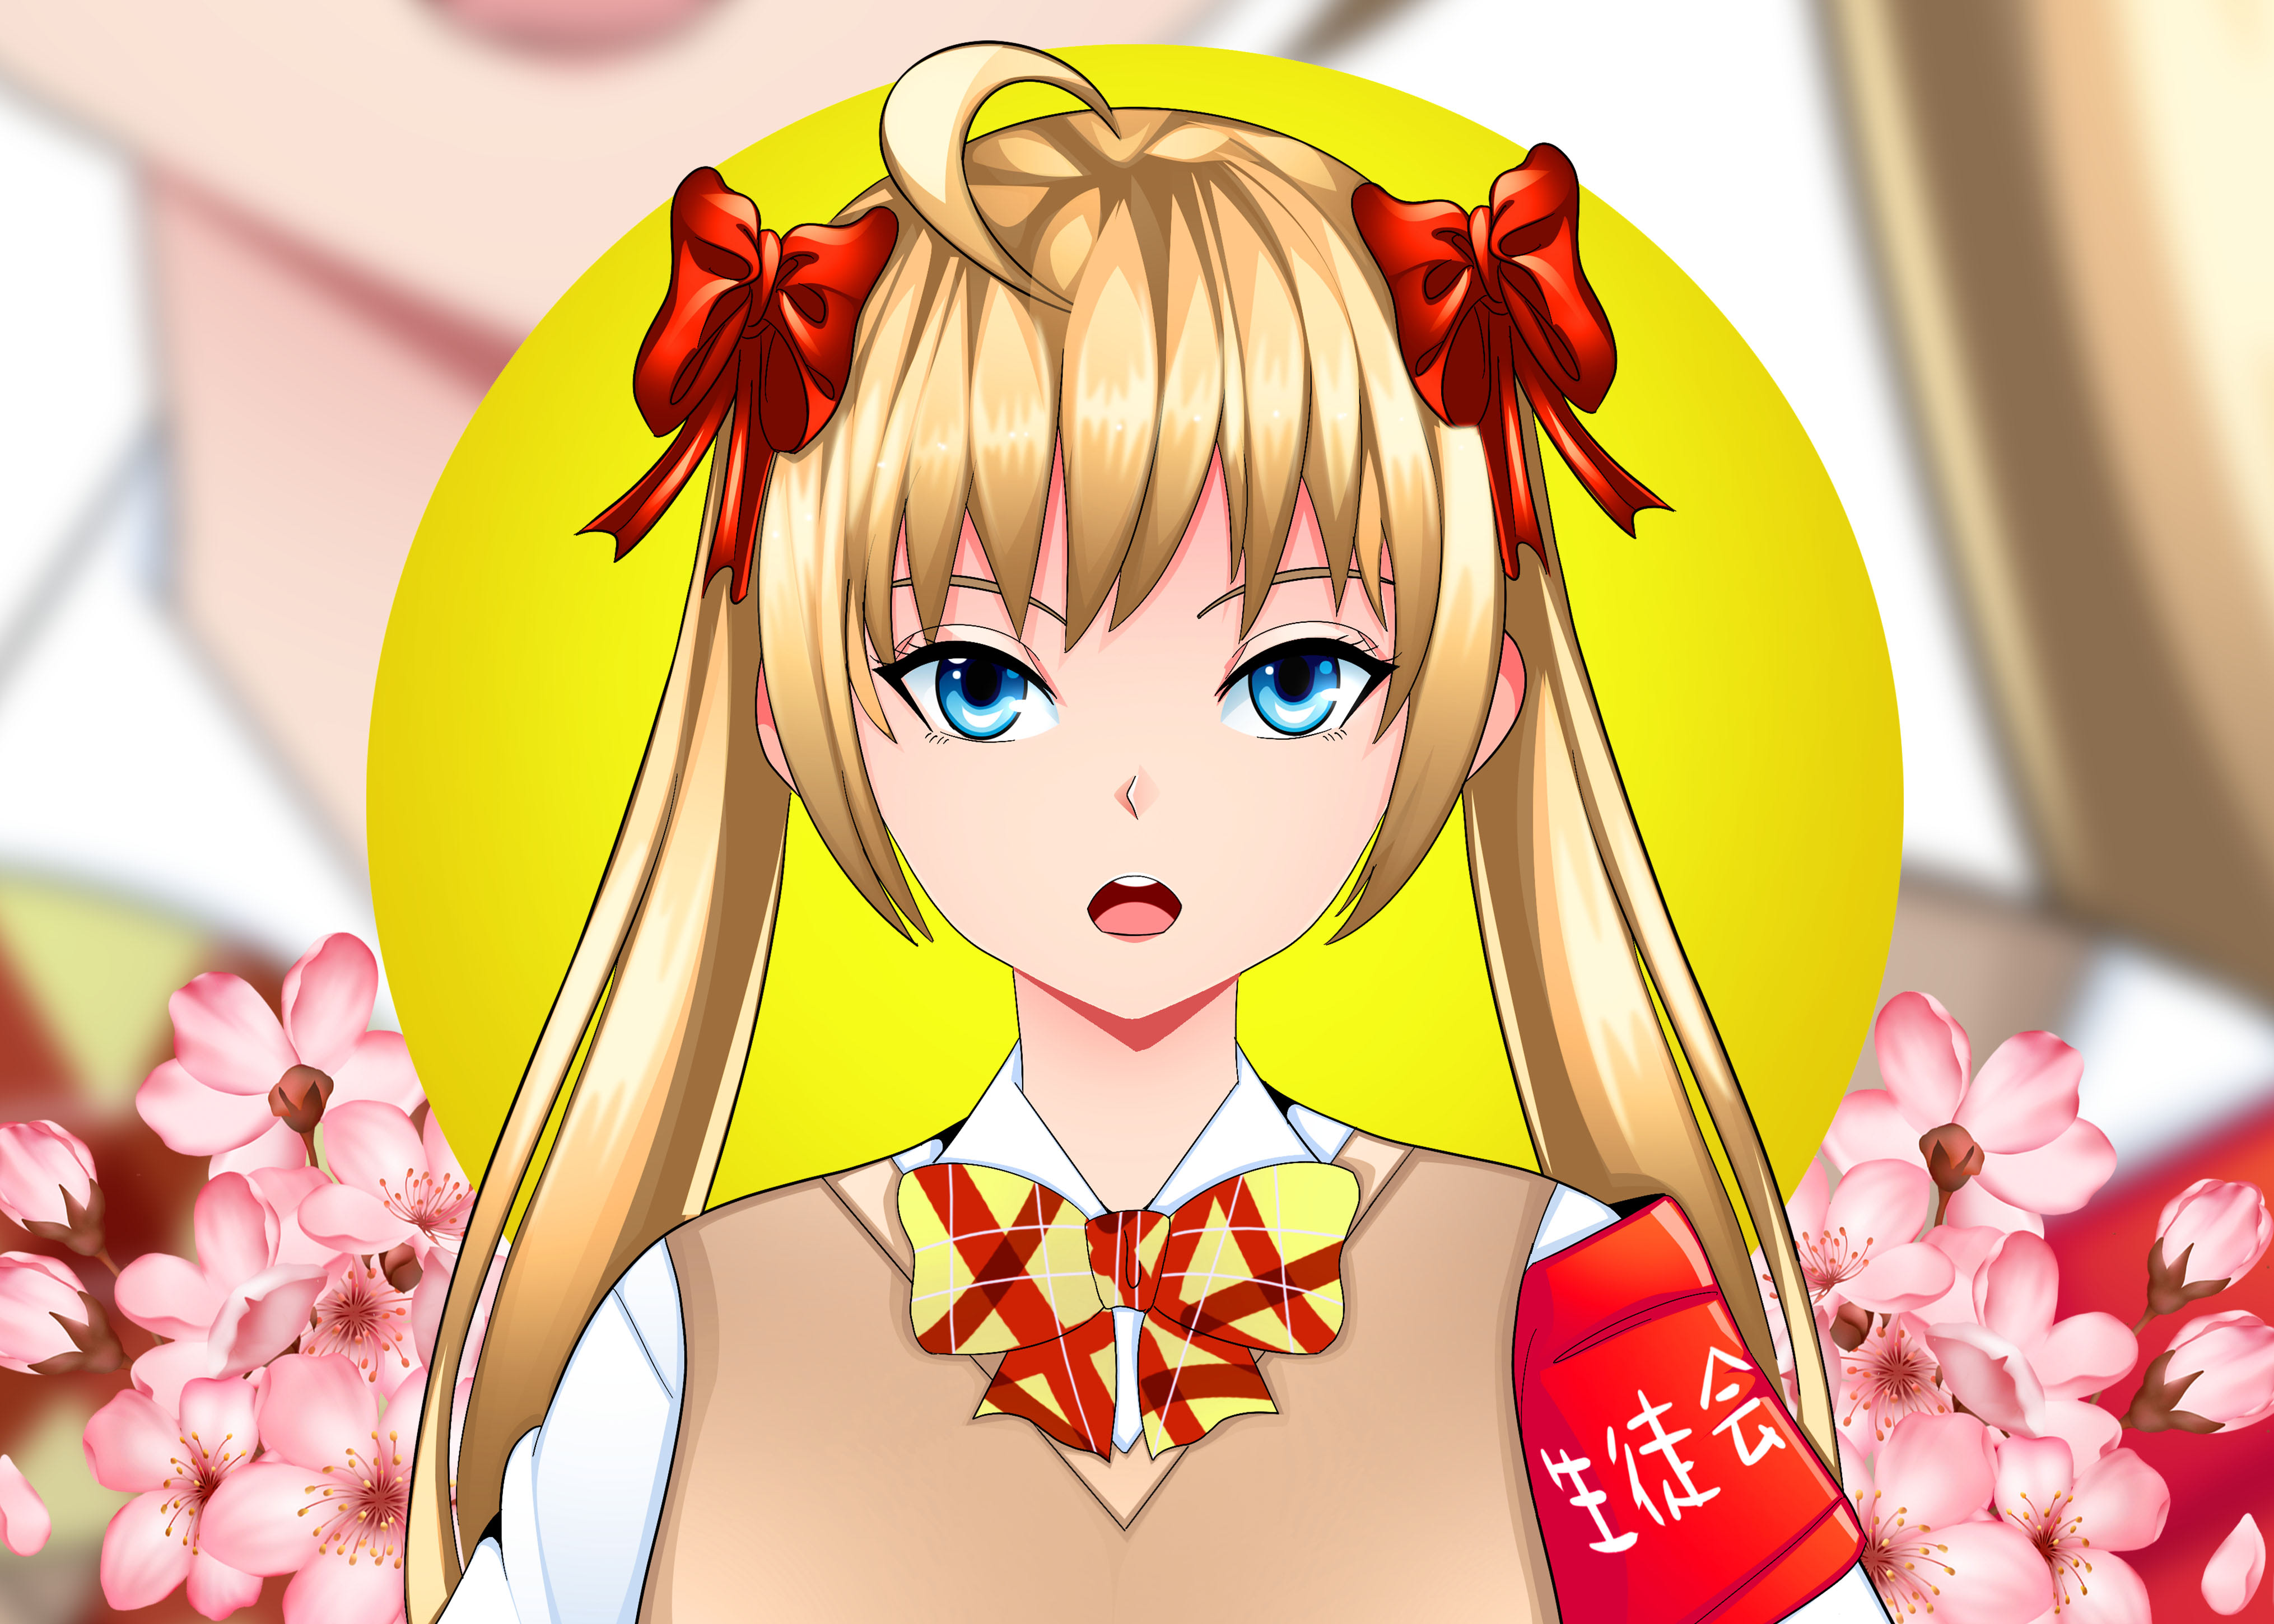 Draw cute anime profile picture, avatar, emotes, icon, logo by Mooneto